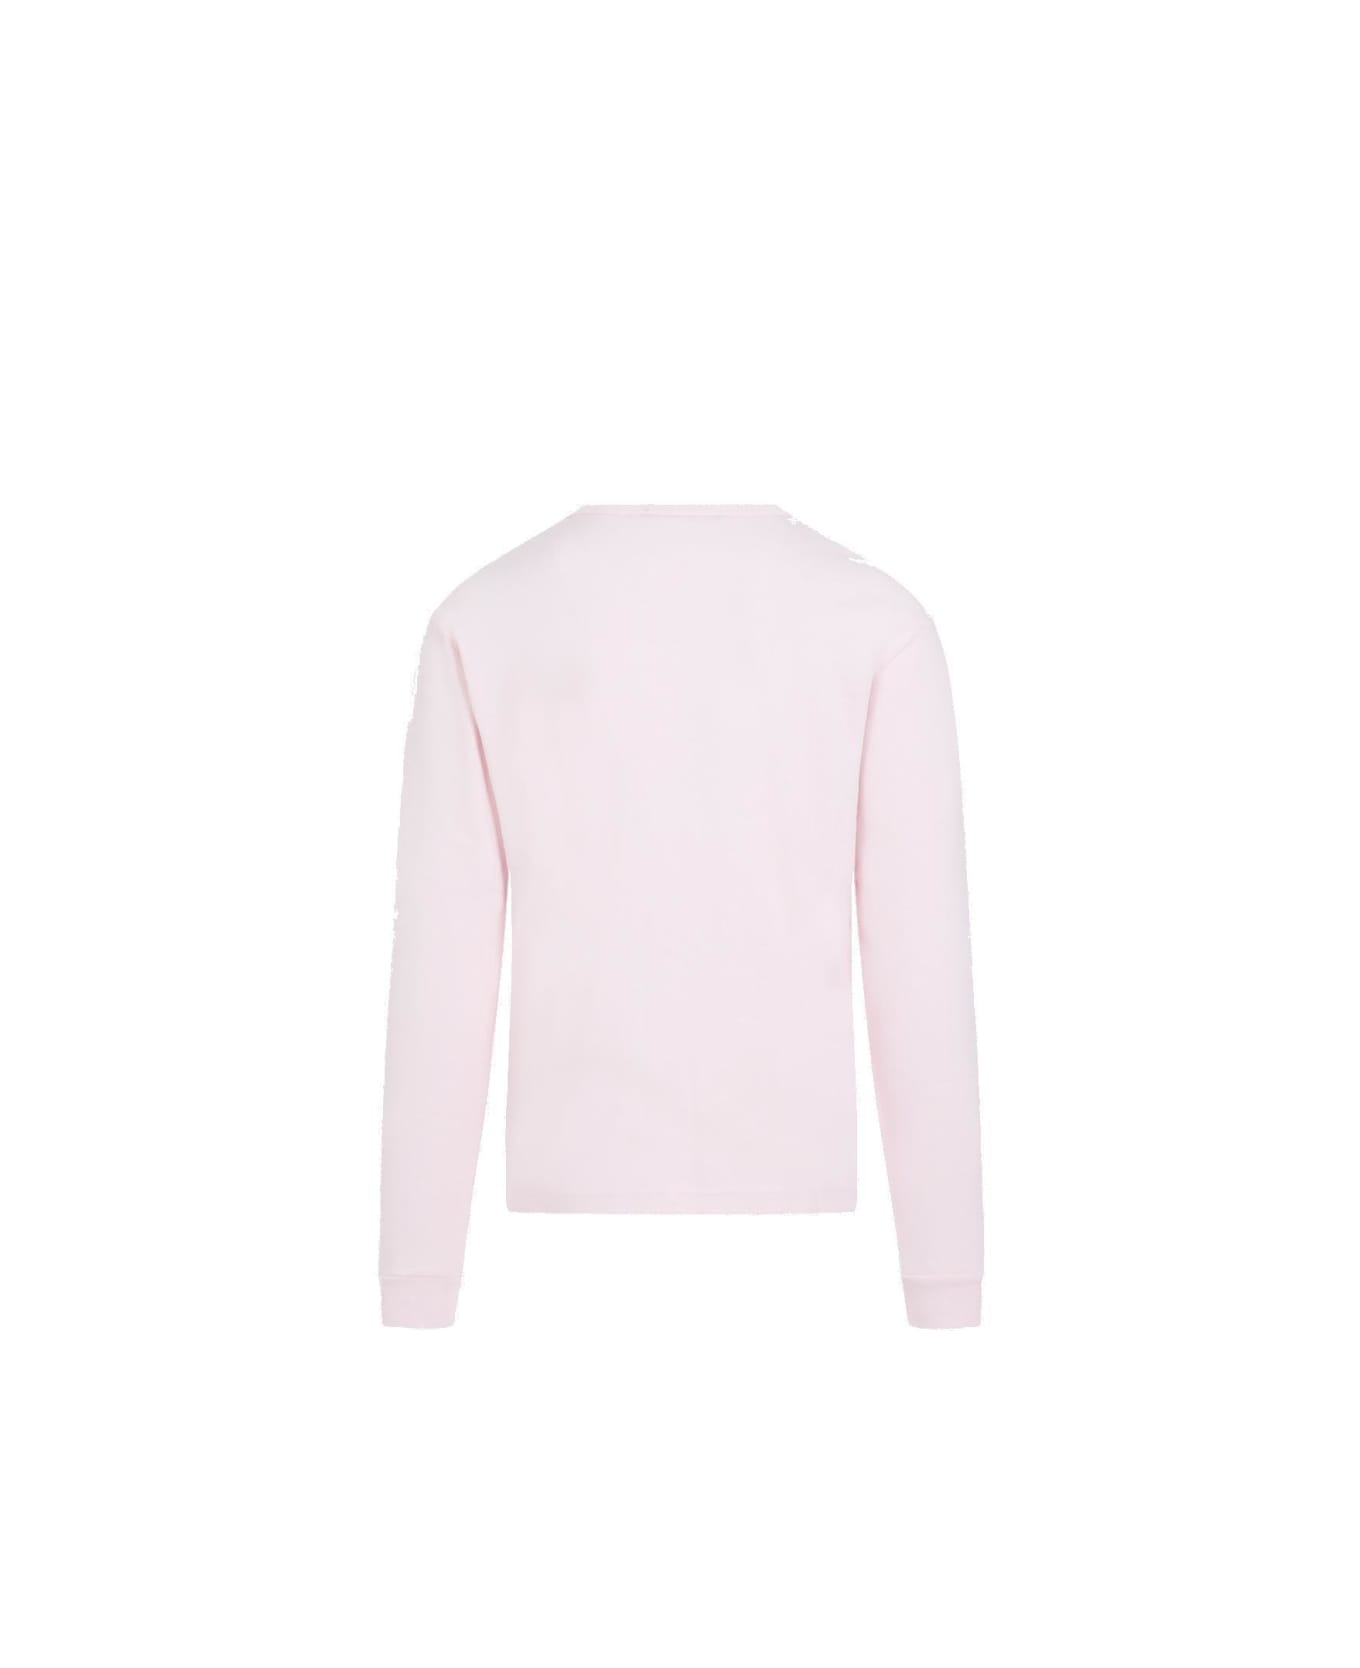 Acne Studios Logo Graphic Sleeved T-shirt - Pink Tシャツ